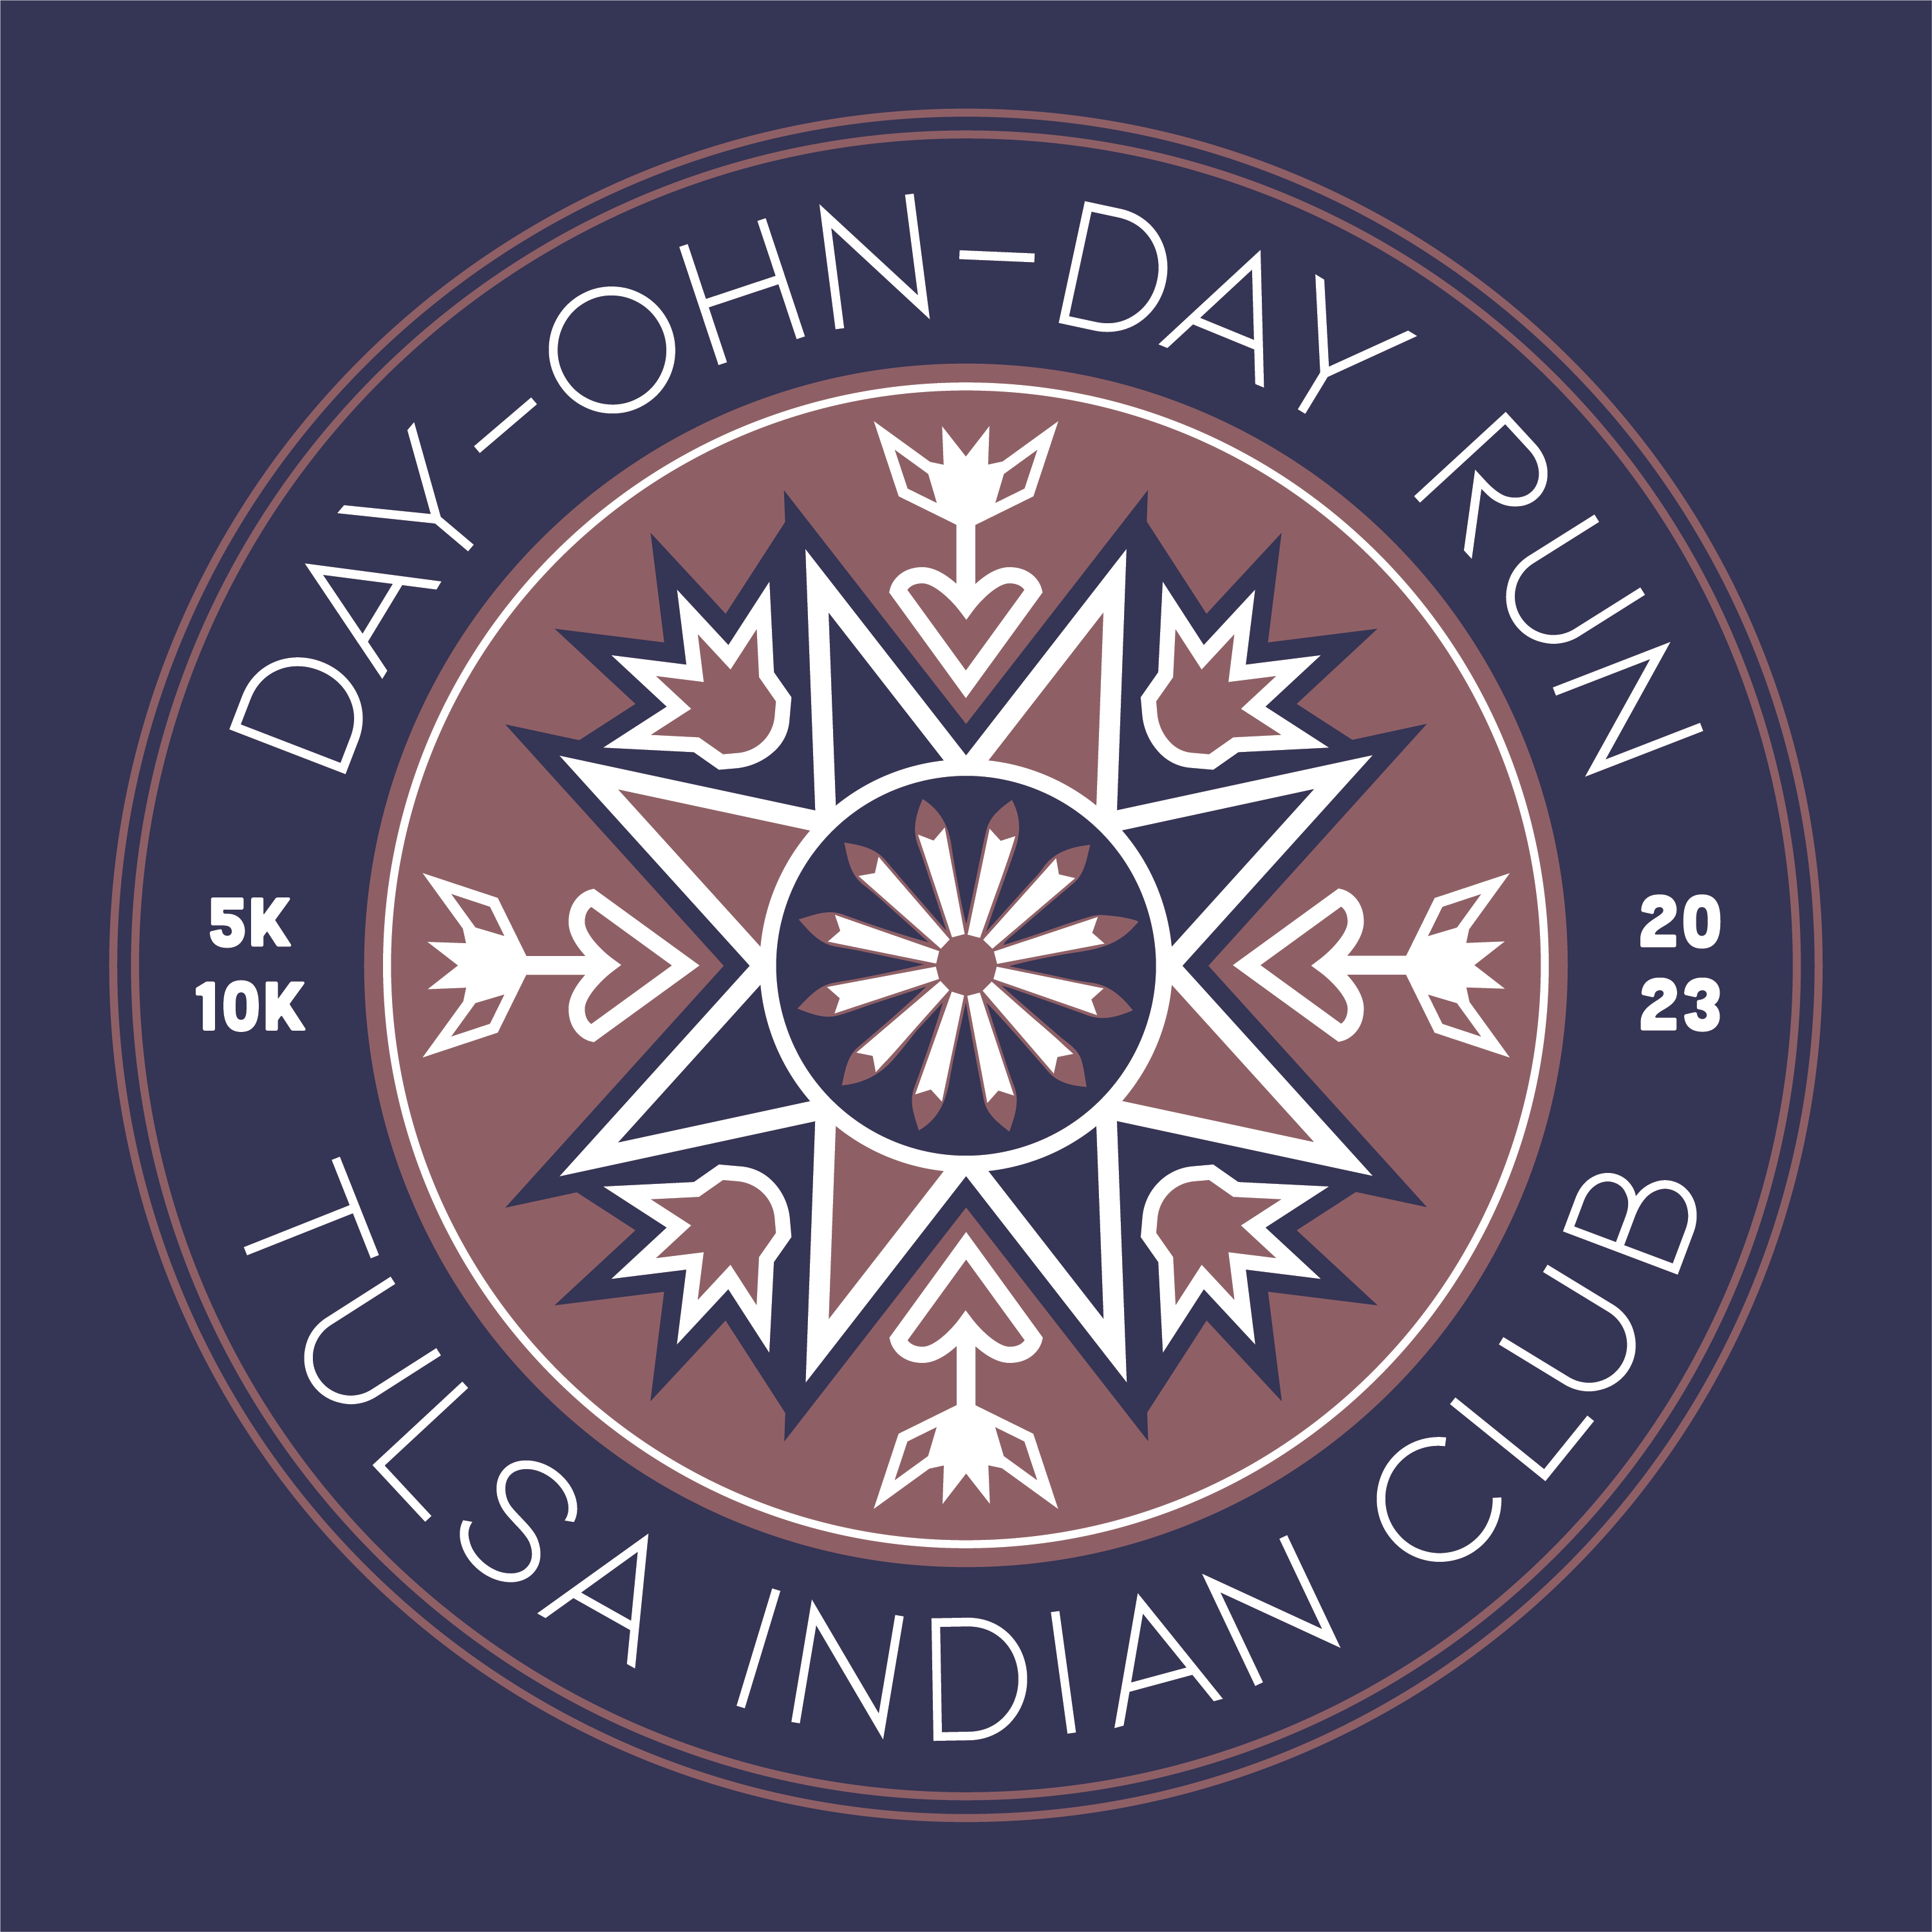 Day Ohn Day Run in Tulsa, OK - Details, Registration, and Results